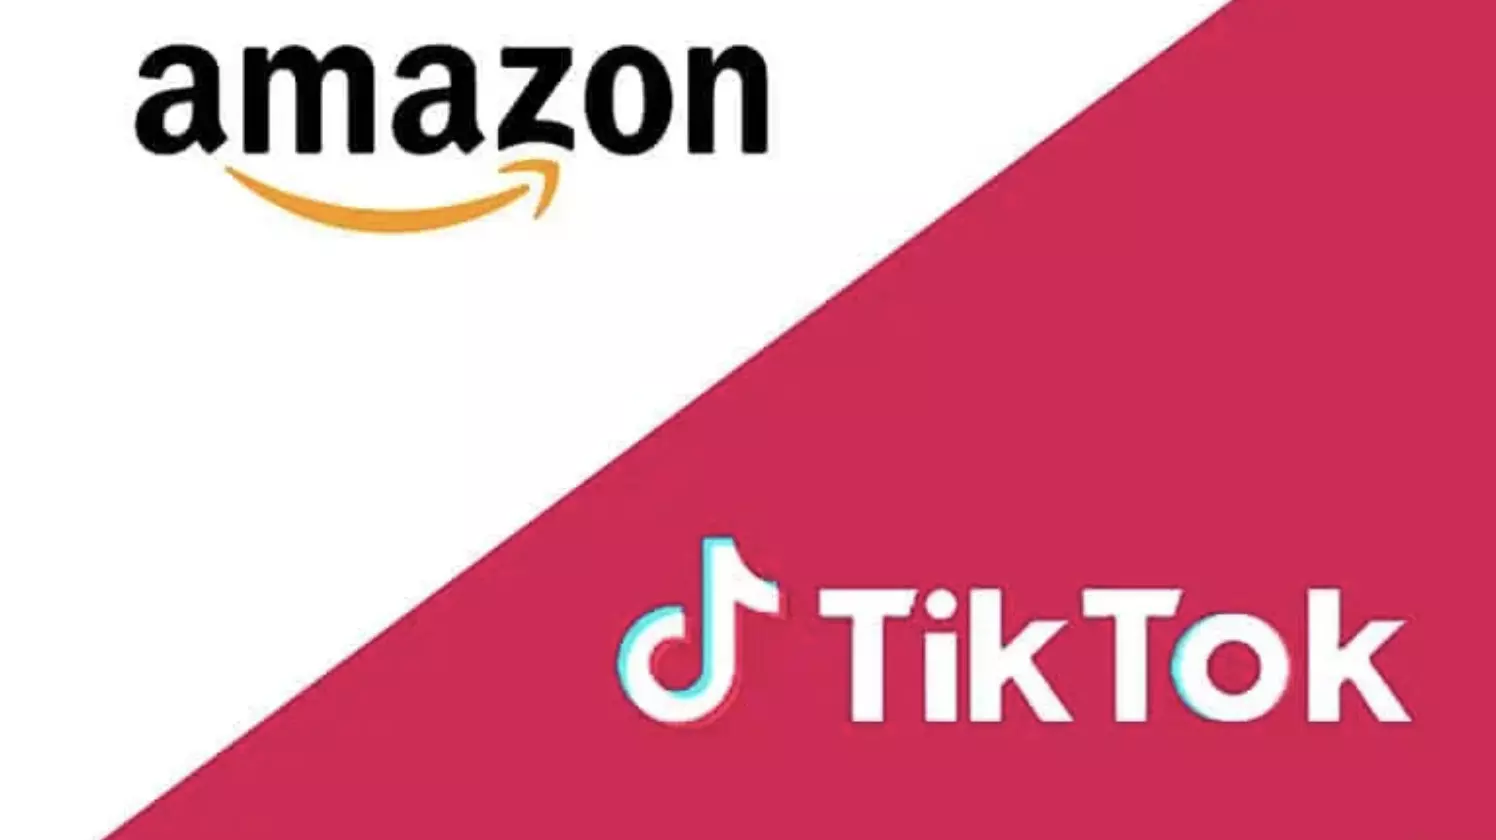 Could TikToks venture into social commerce pose a threat to e-commerce giant Amazon?